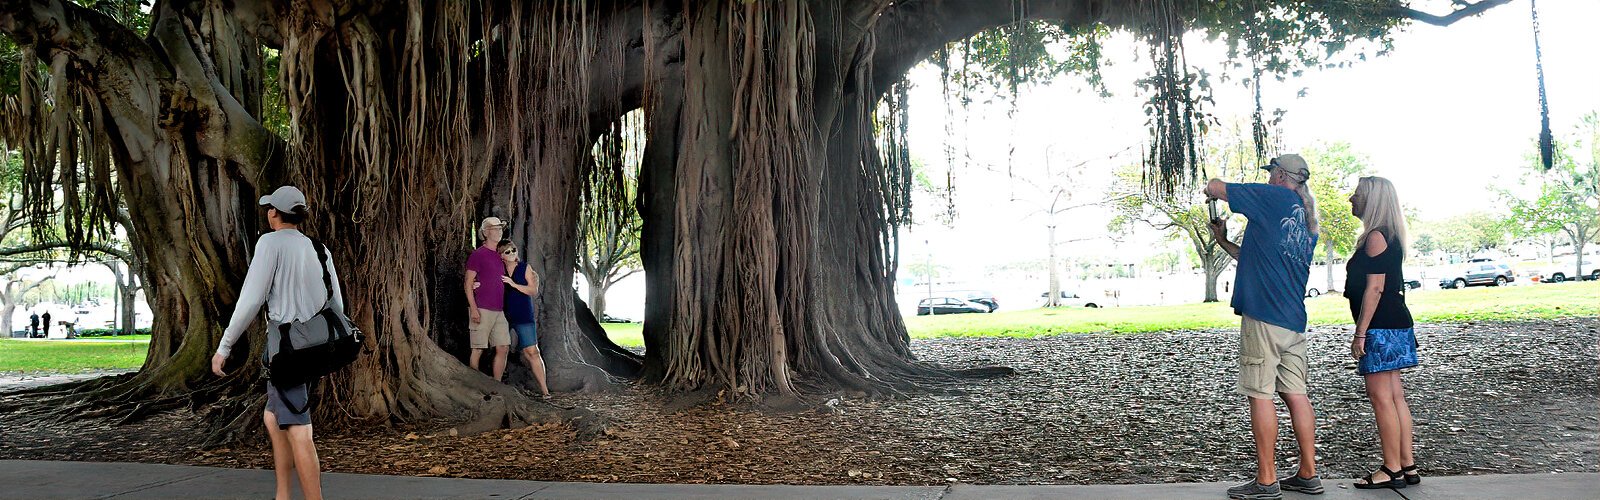 Nestled into the banyan tree for a picture, a couple gives the scale of the size of this enormous tree located on the northern end of the Museum of Fine Arts.